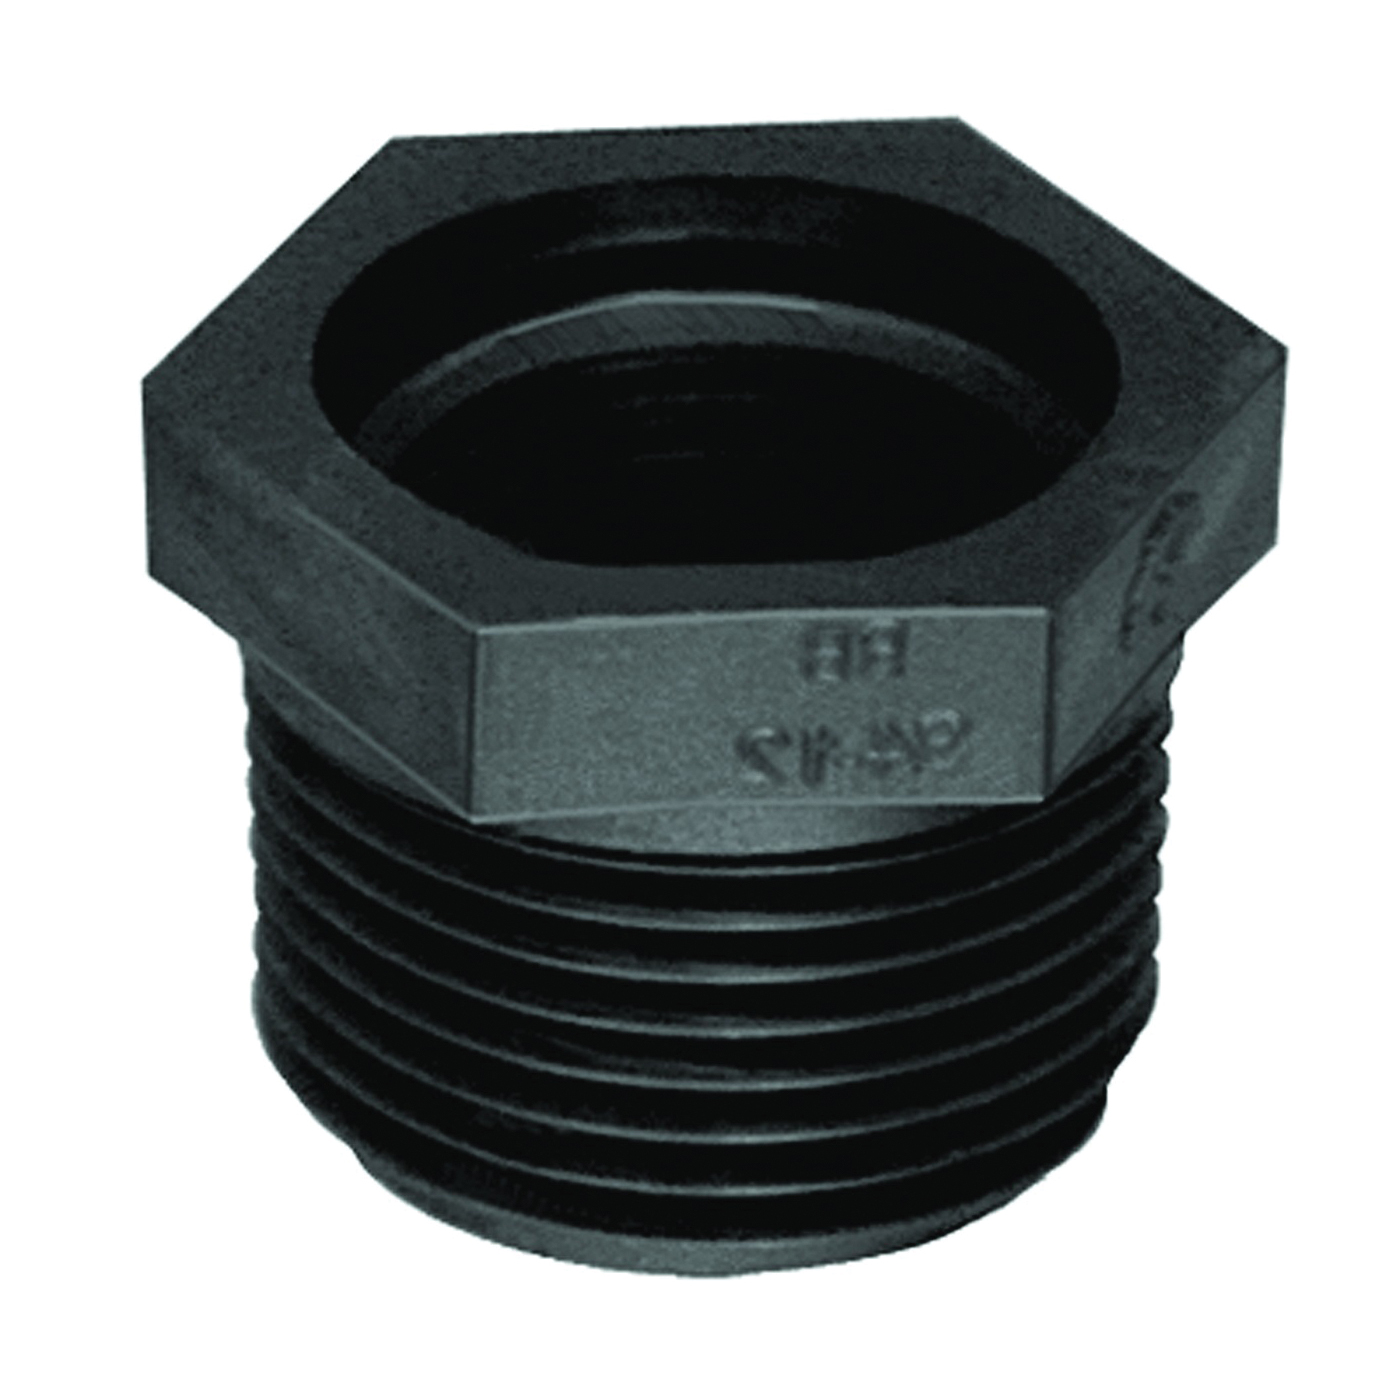 RB200-1P Reducing Pipe Bushing, 2 x 1 in, MPT x FPT, Black